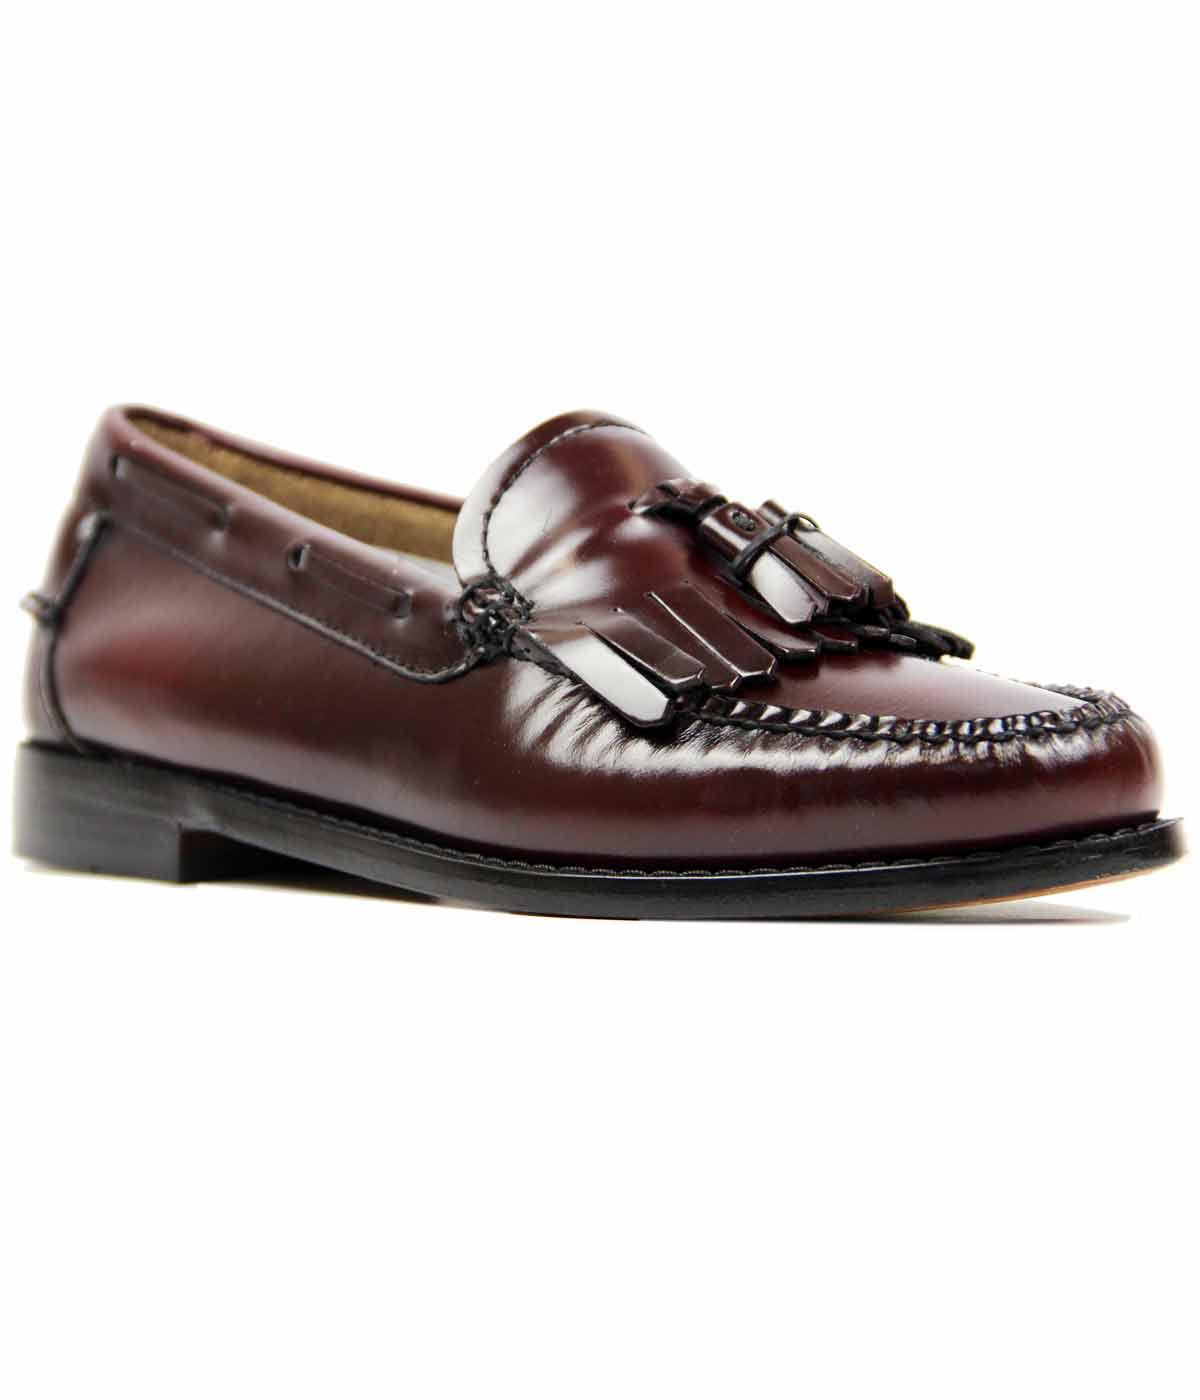 BASS WEEJUNS Esther Retro Mod 60s Kilted Loafer in Wine